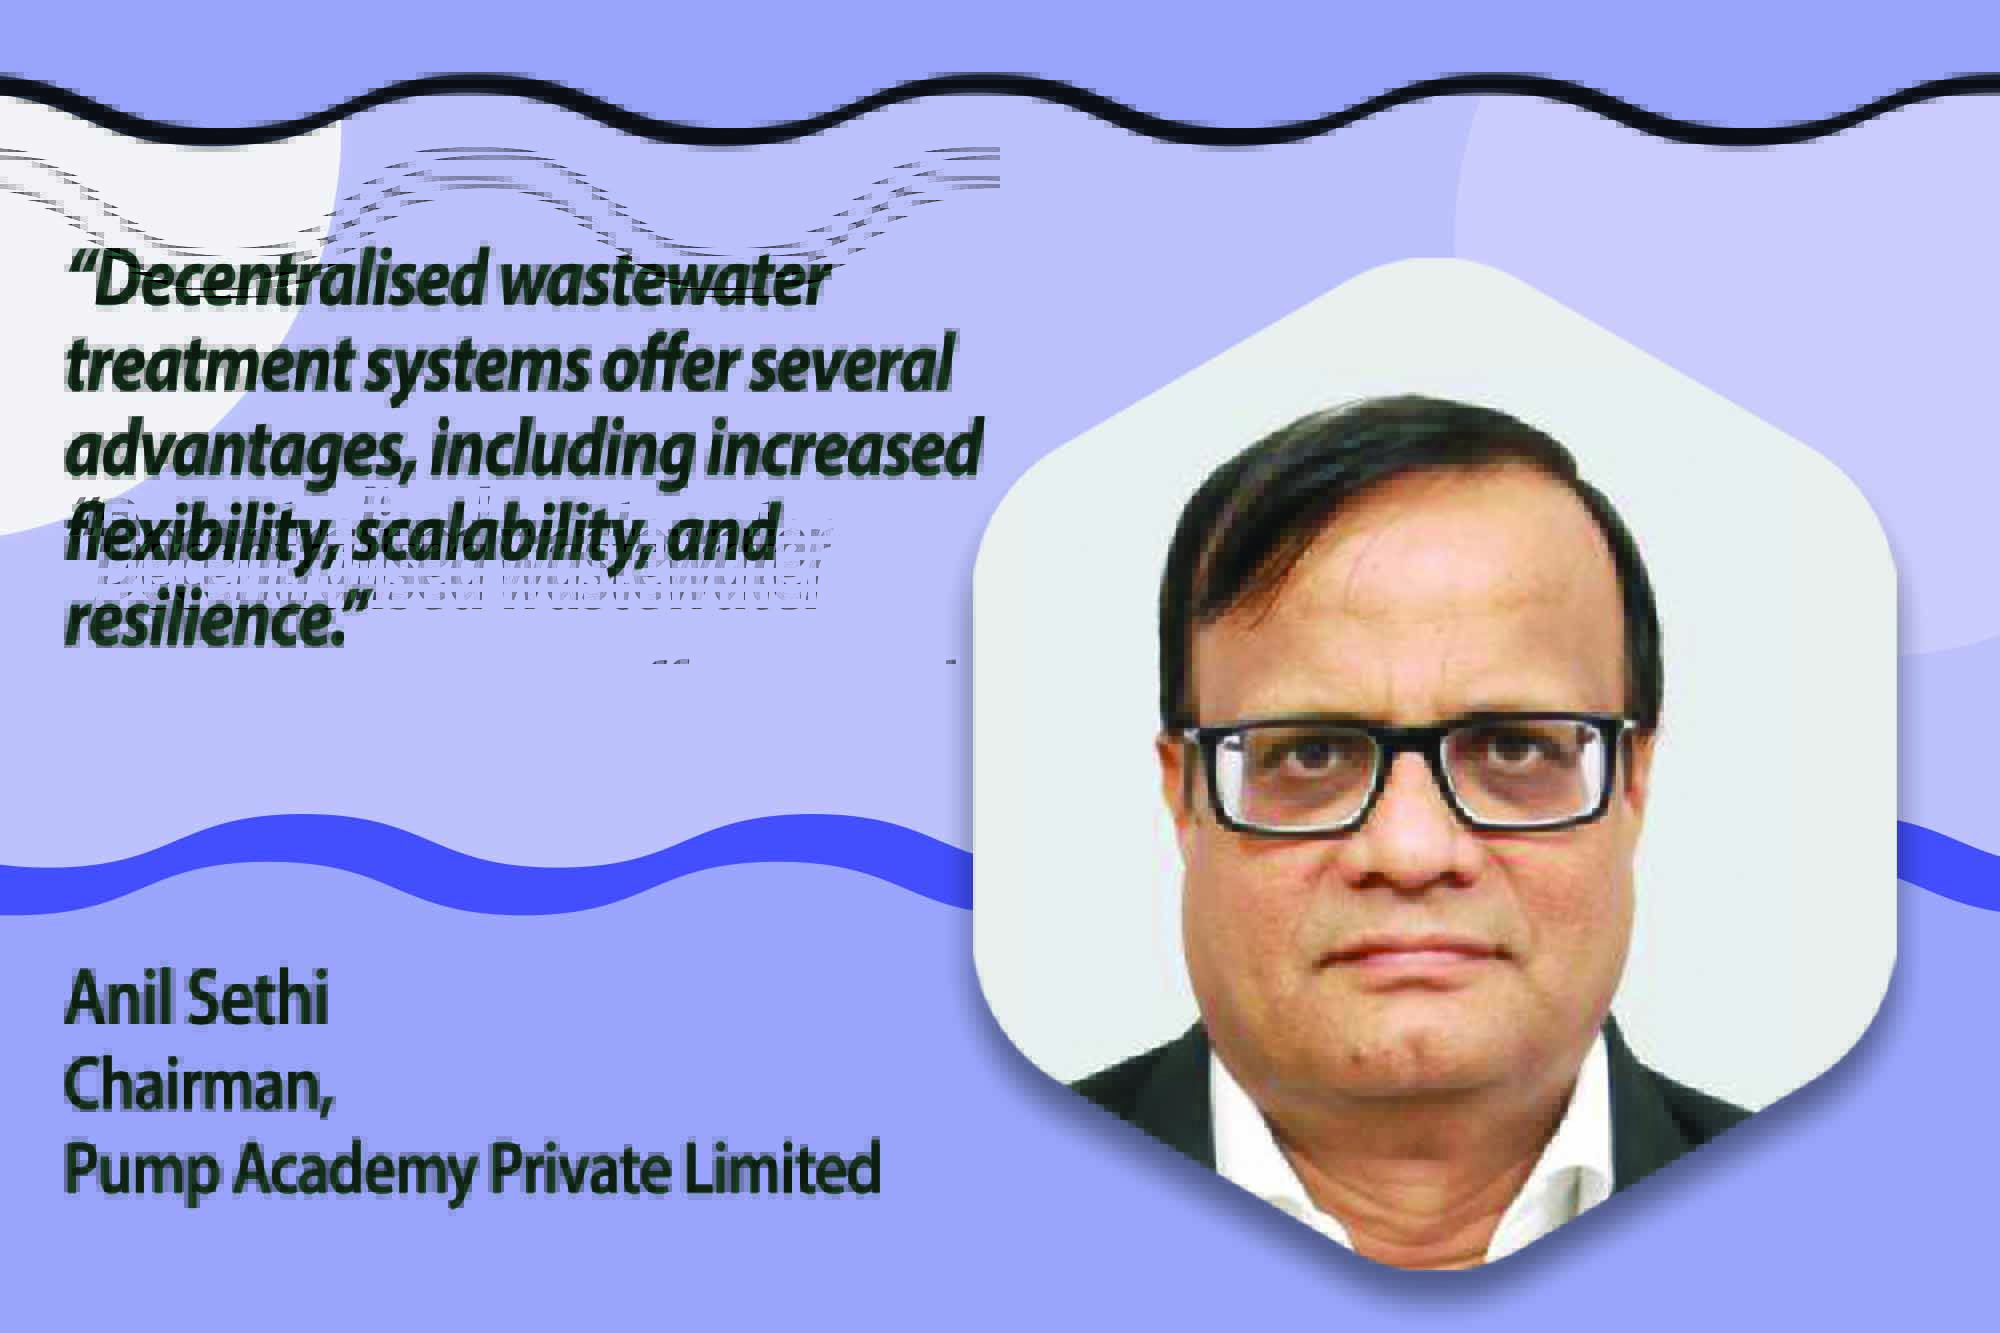 Water scarcity in India is a growing concern exacerbated by various factors, necessitating technological interventions. Advanced wastewater treatment technology addresses this challenge by enabling water reuse and minimising environmental impact.